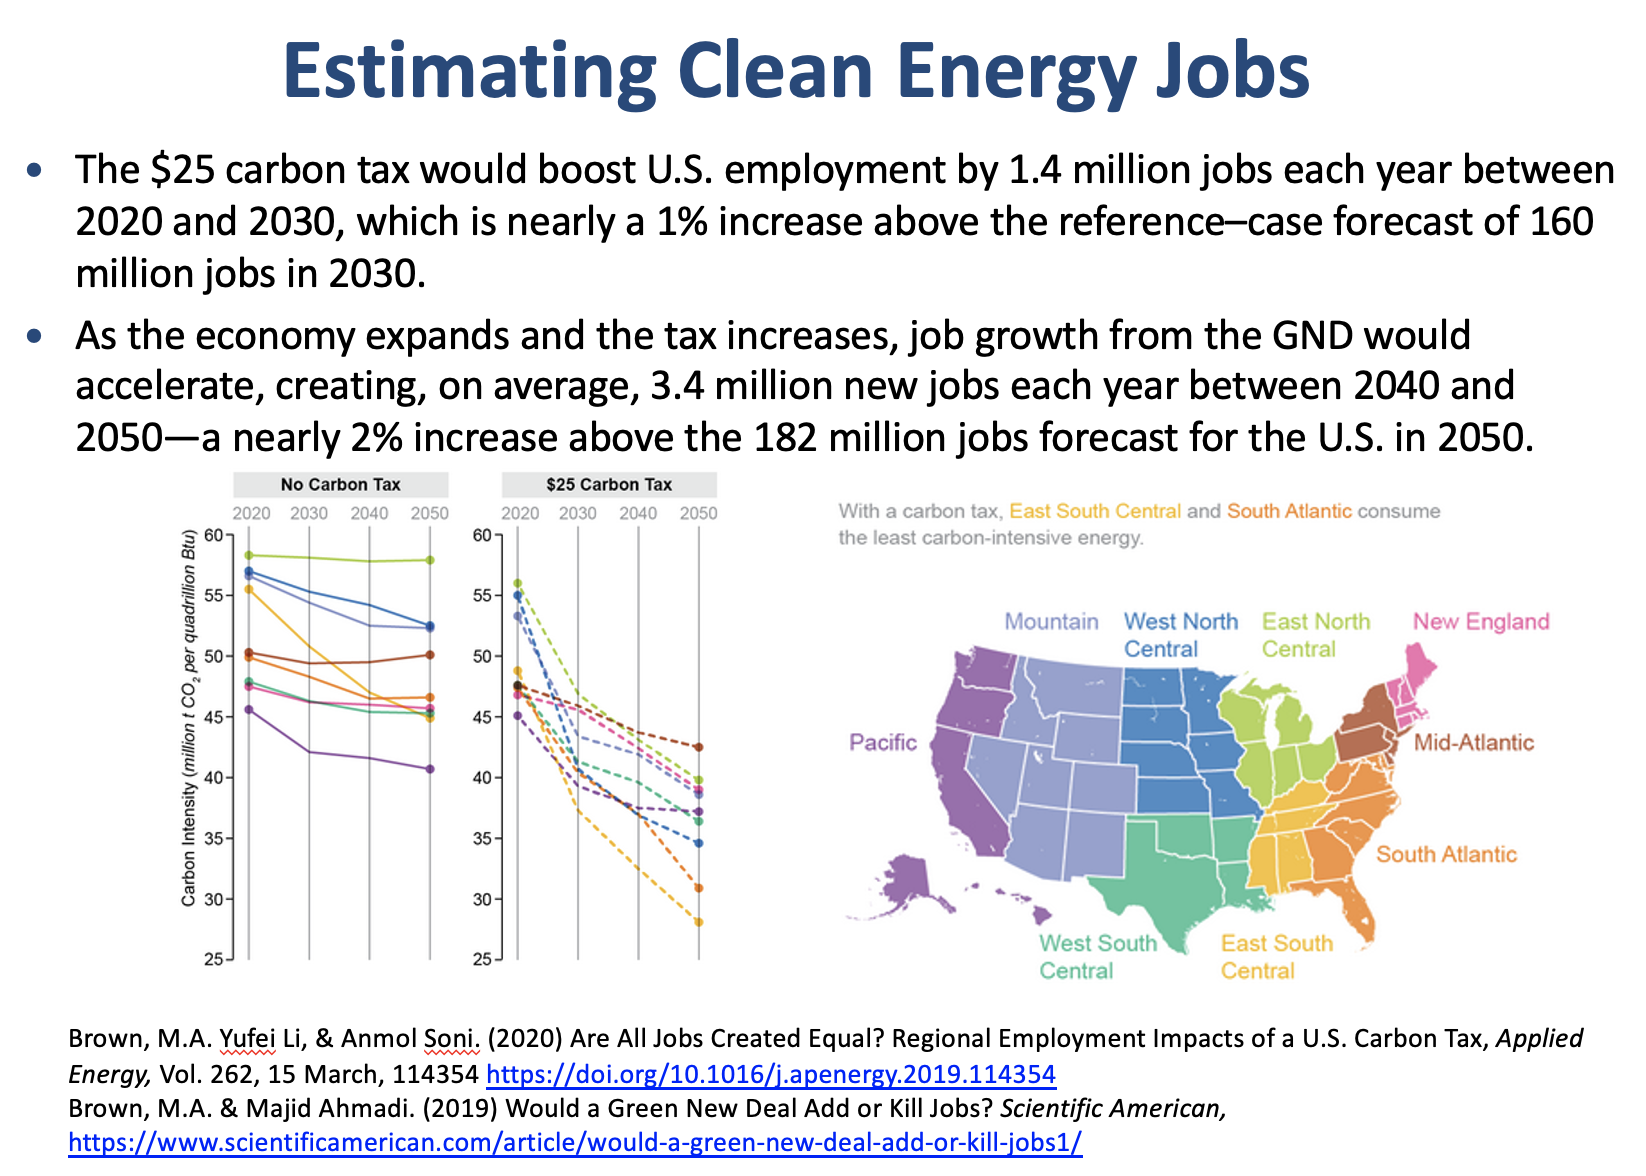 Carbon tax impacts on fuel mix and jobs